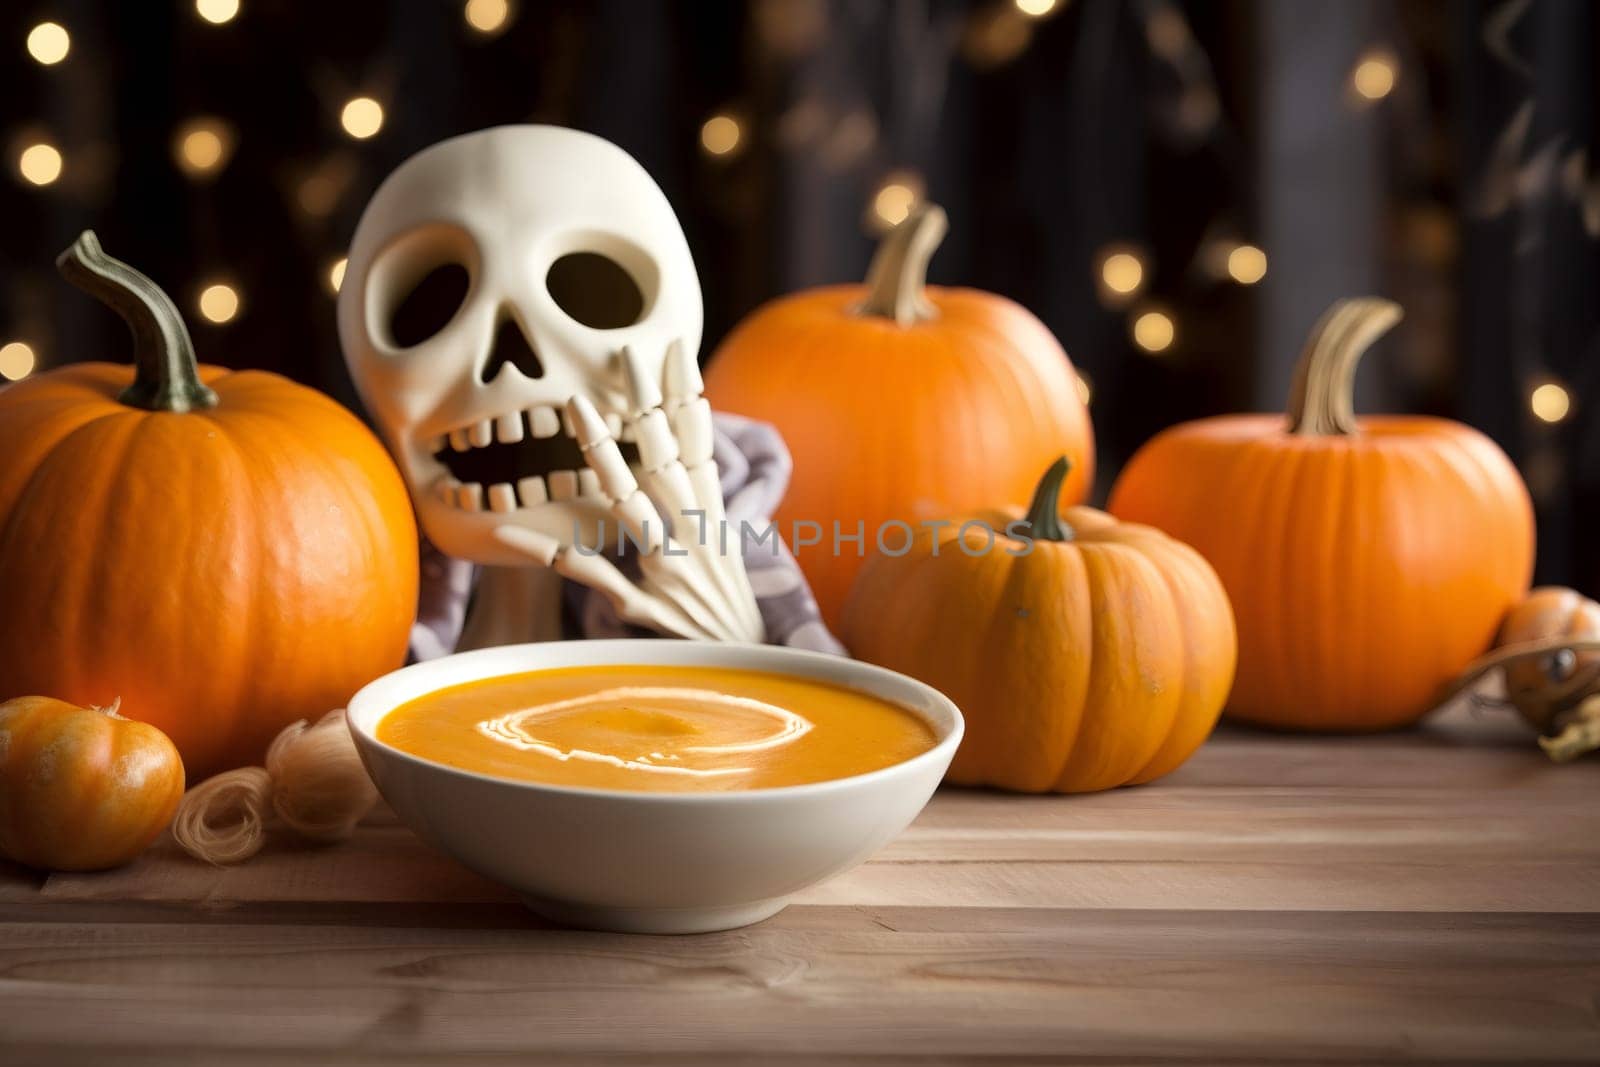 One bowl of pumpkin soup with skeleton and pumpkins lies on a wooden table in the kitchen with blurred background and bokeh, close-up side view.